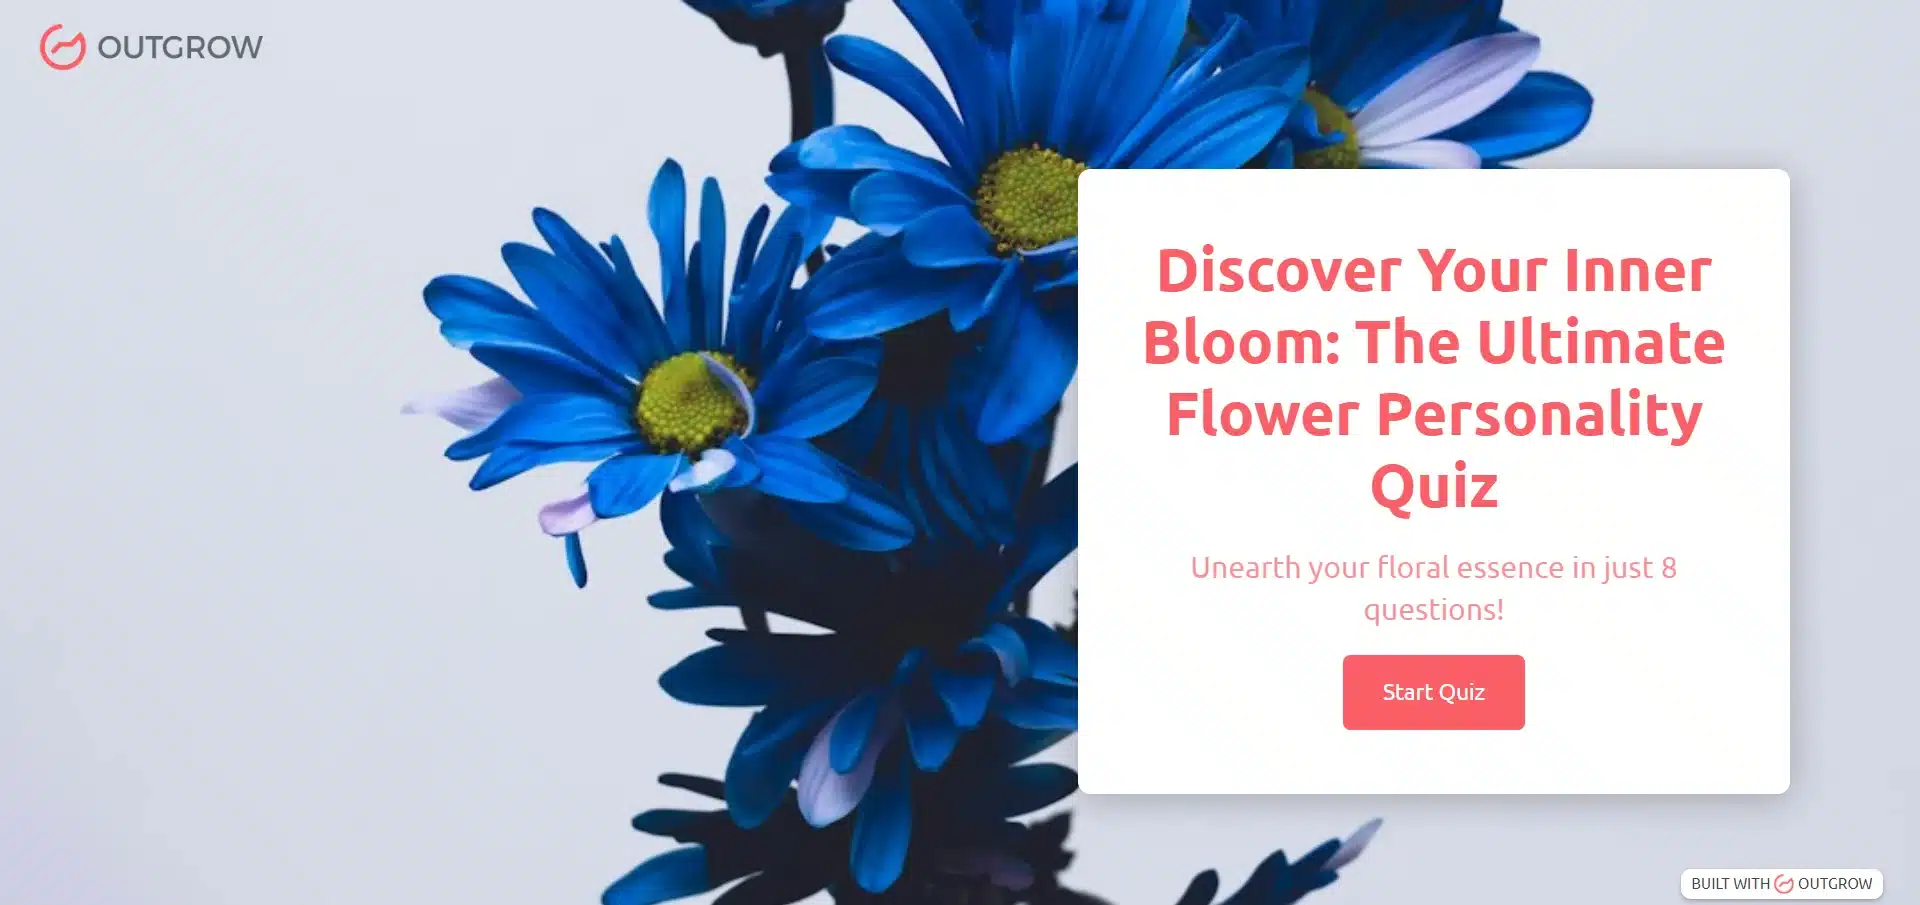 Discover Your Inner Bloom The Ultimate Flower Personality Quiz